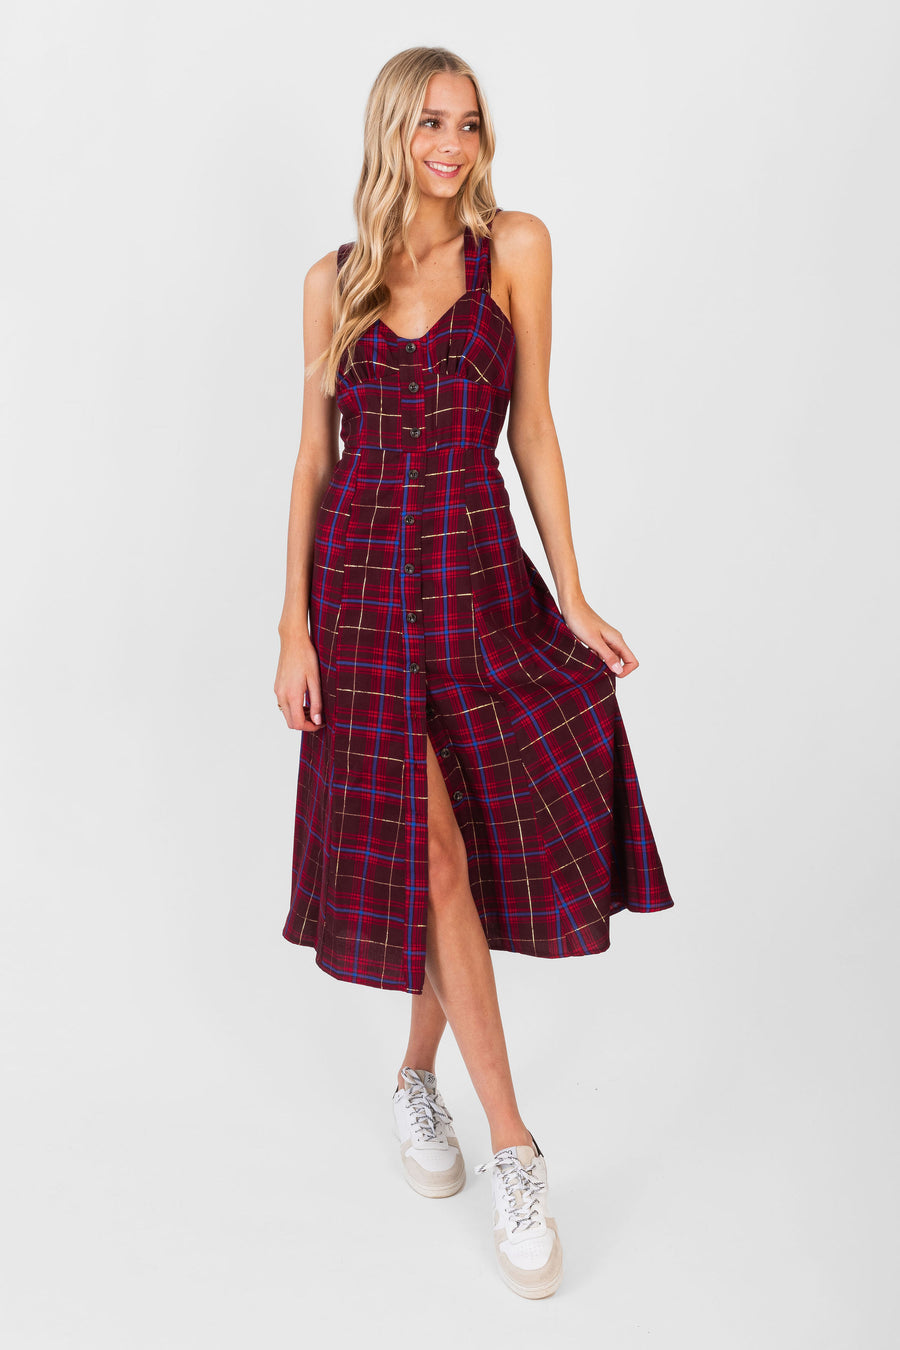 Kimmee Dress Bordeaux Check *Limited*Edition*